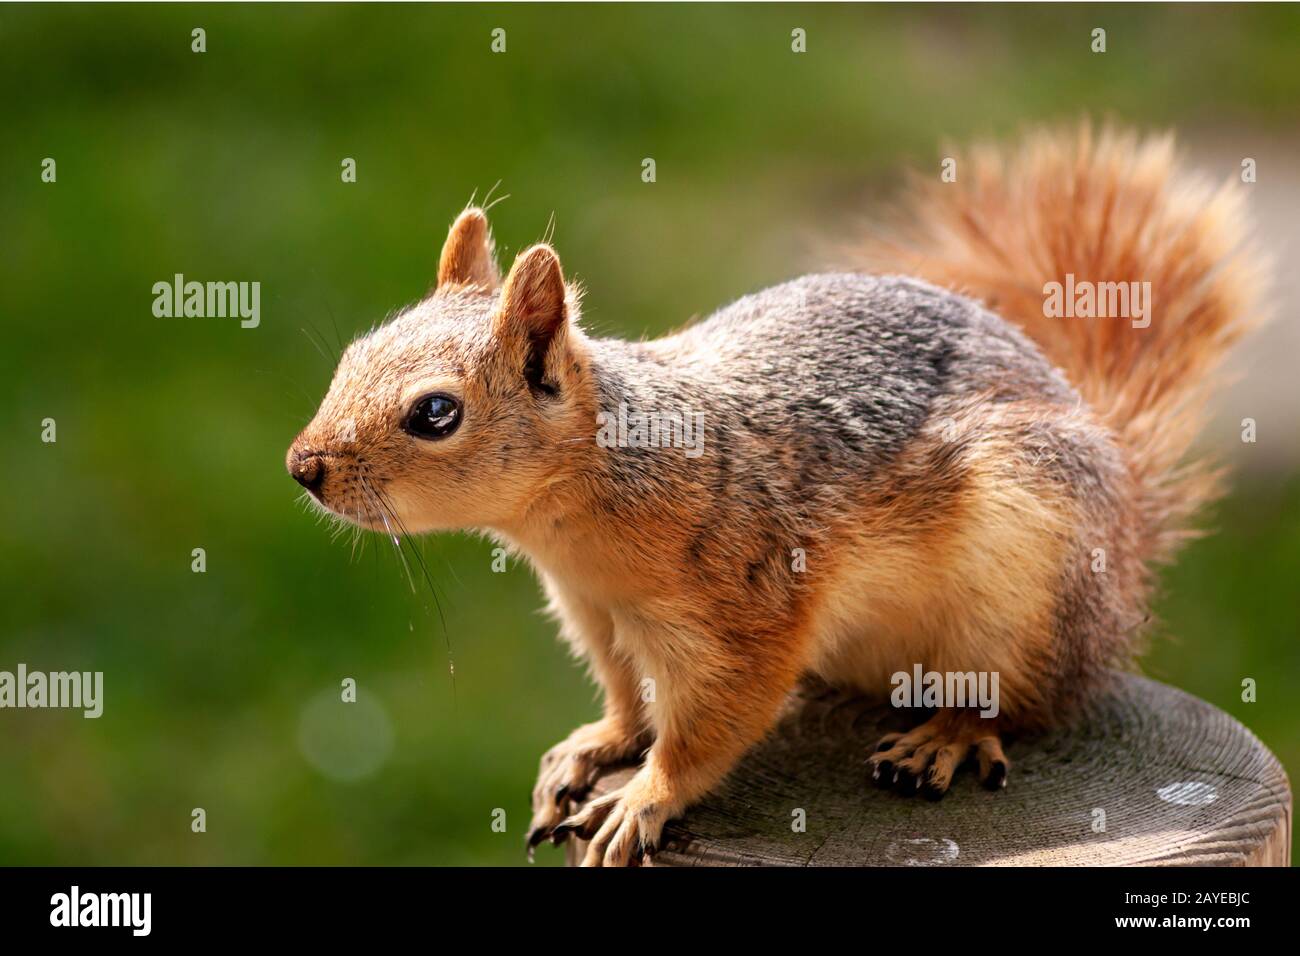 Brown fluffy squirrel with big bright eyes and long fluffy tail poses warm-blooded to those walking around the park. Stock Photo